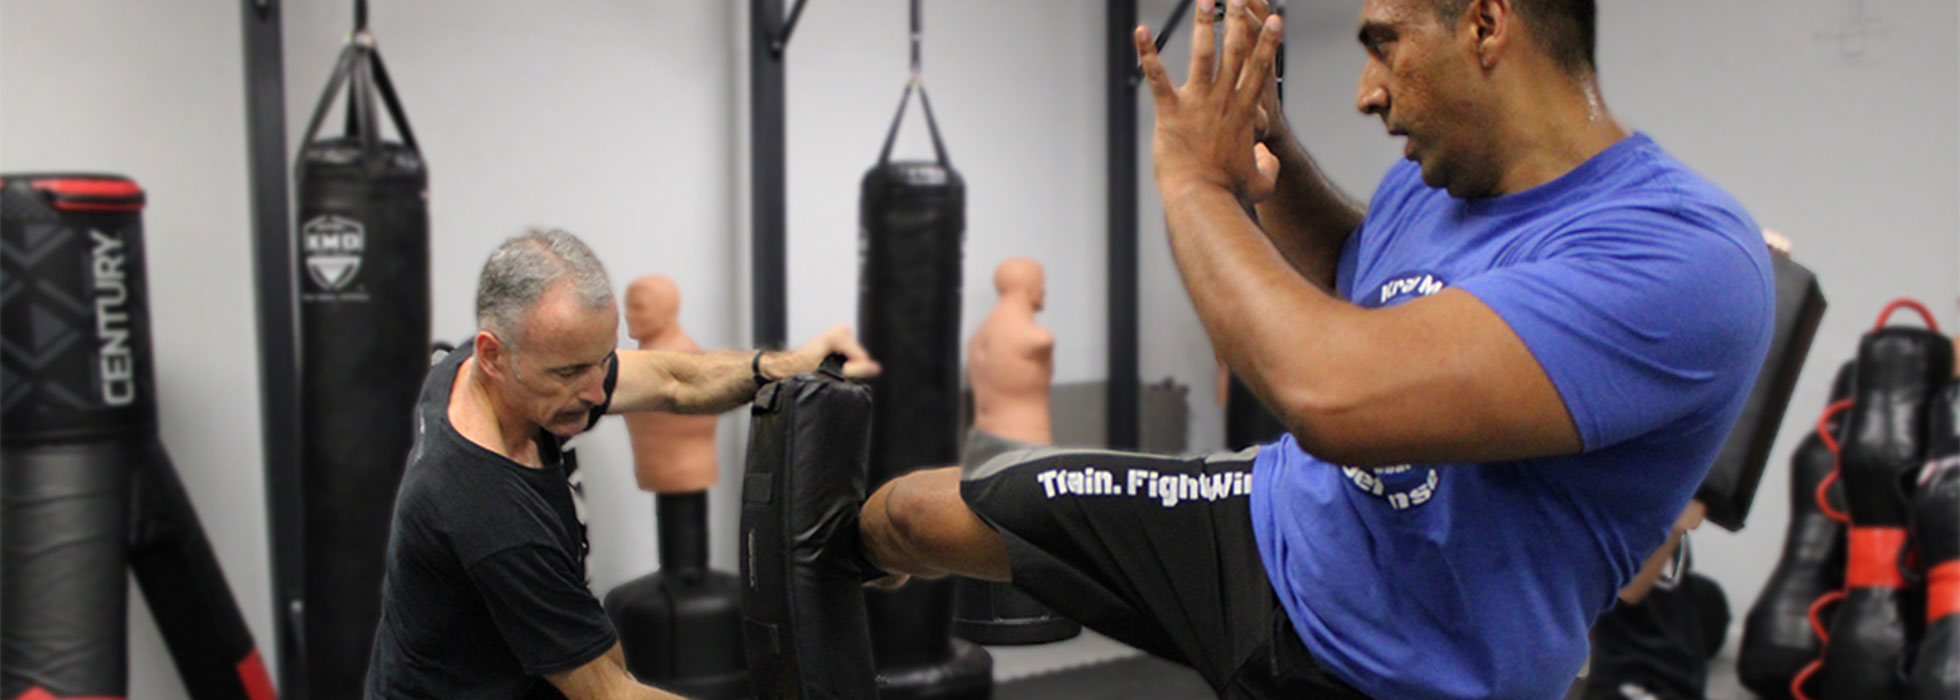 Top 5 Best Martial Arts Academies To Join Near Plano, TX